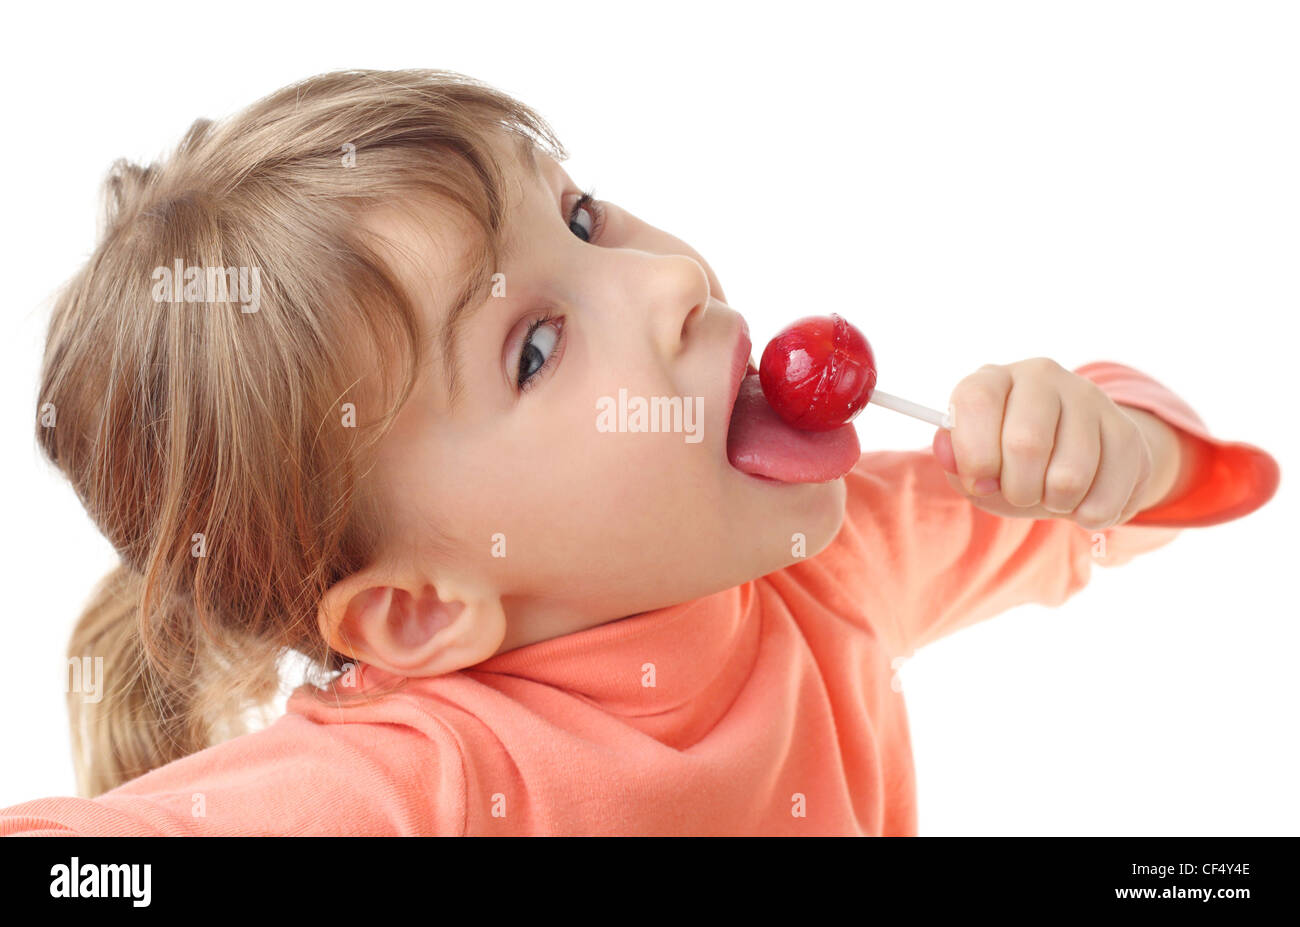 girl eating red lollipop, half body, looking at camera, isolated on white Stock Photo